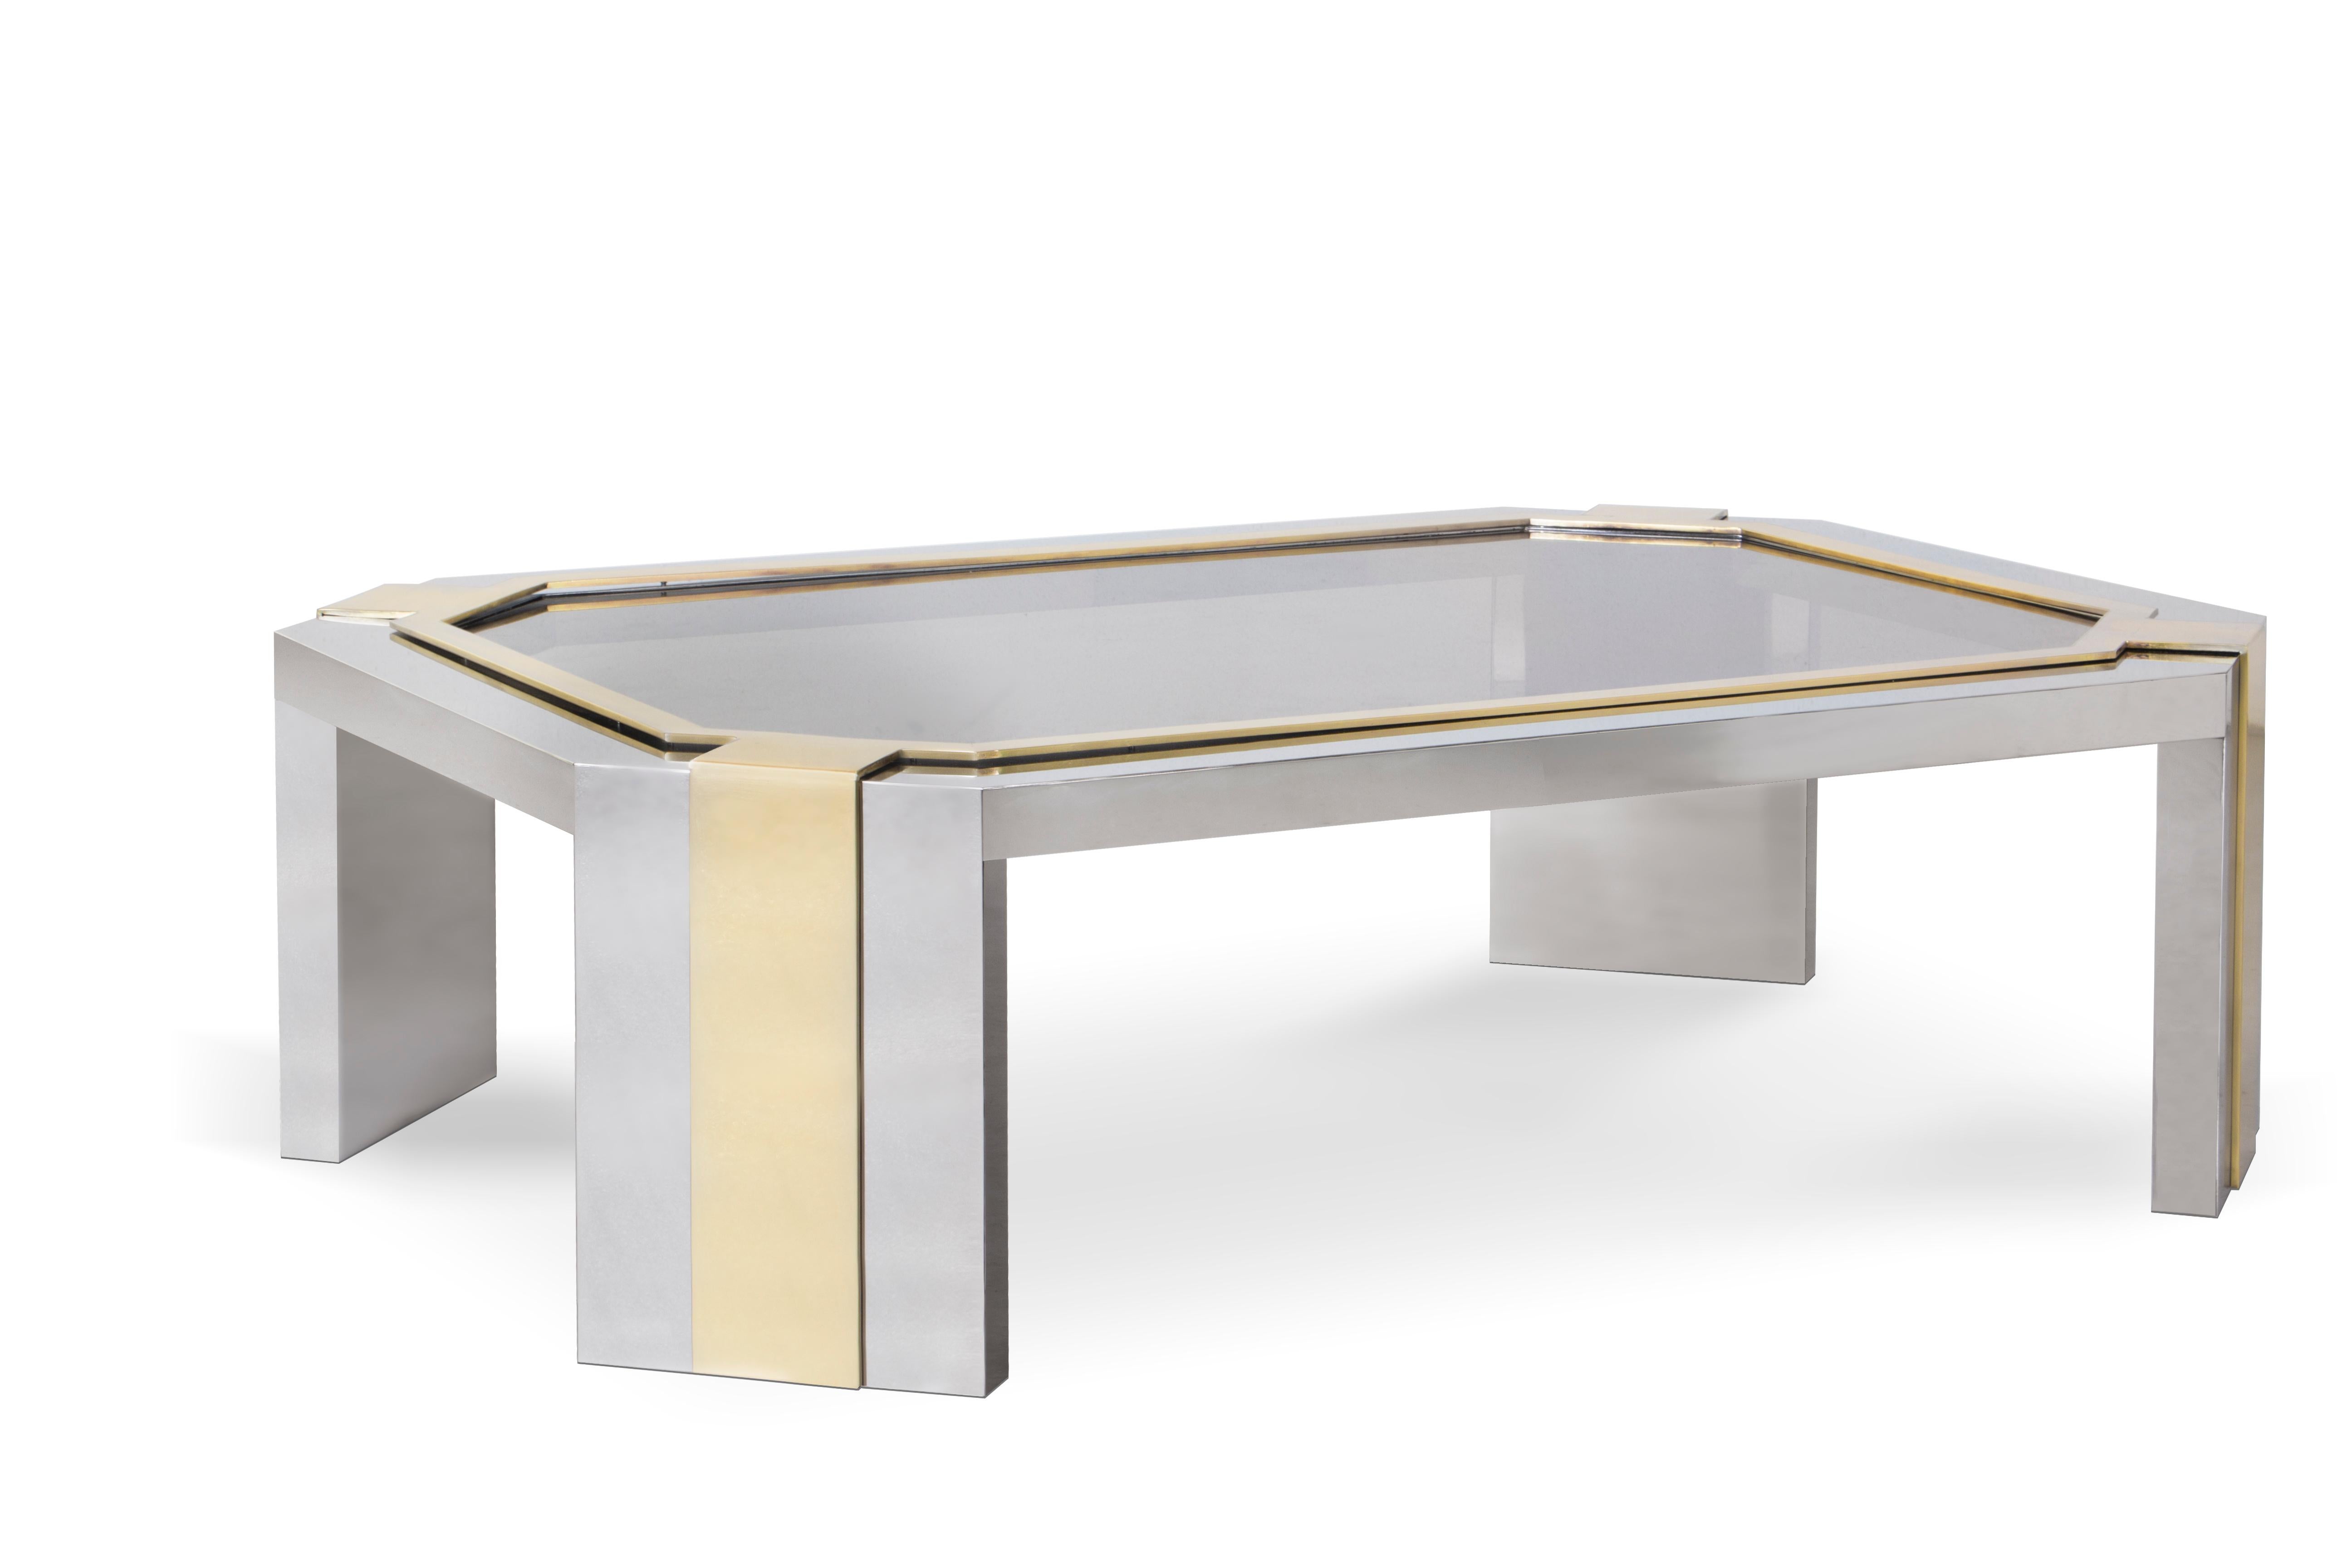 You won’t be able to refuse the allure of the Minx coffee table. Her structured geometric frame is coupled with an exotic blend of metals and a mirrored top, capturing the awe and desire of her many admirers.

Top: Tempered bronze glass 
Base: